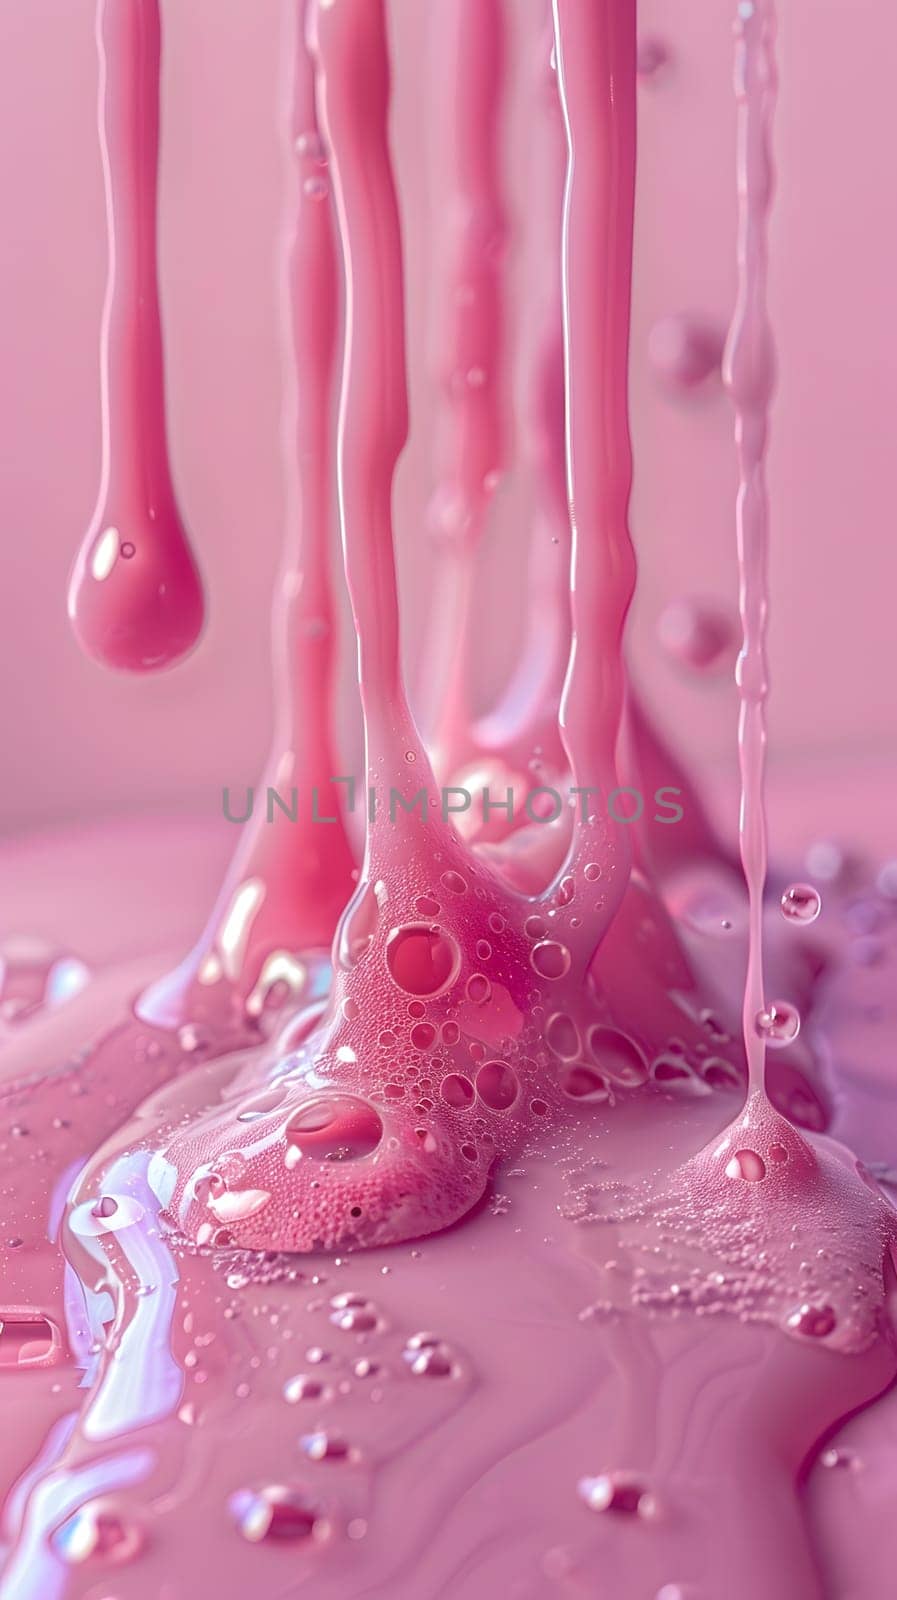 a close up of pink paint dripping on a pink surface by Nadtochiy